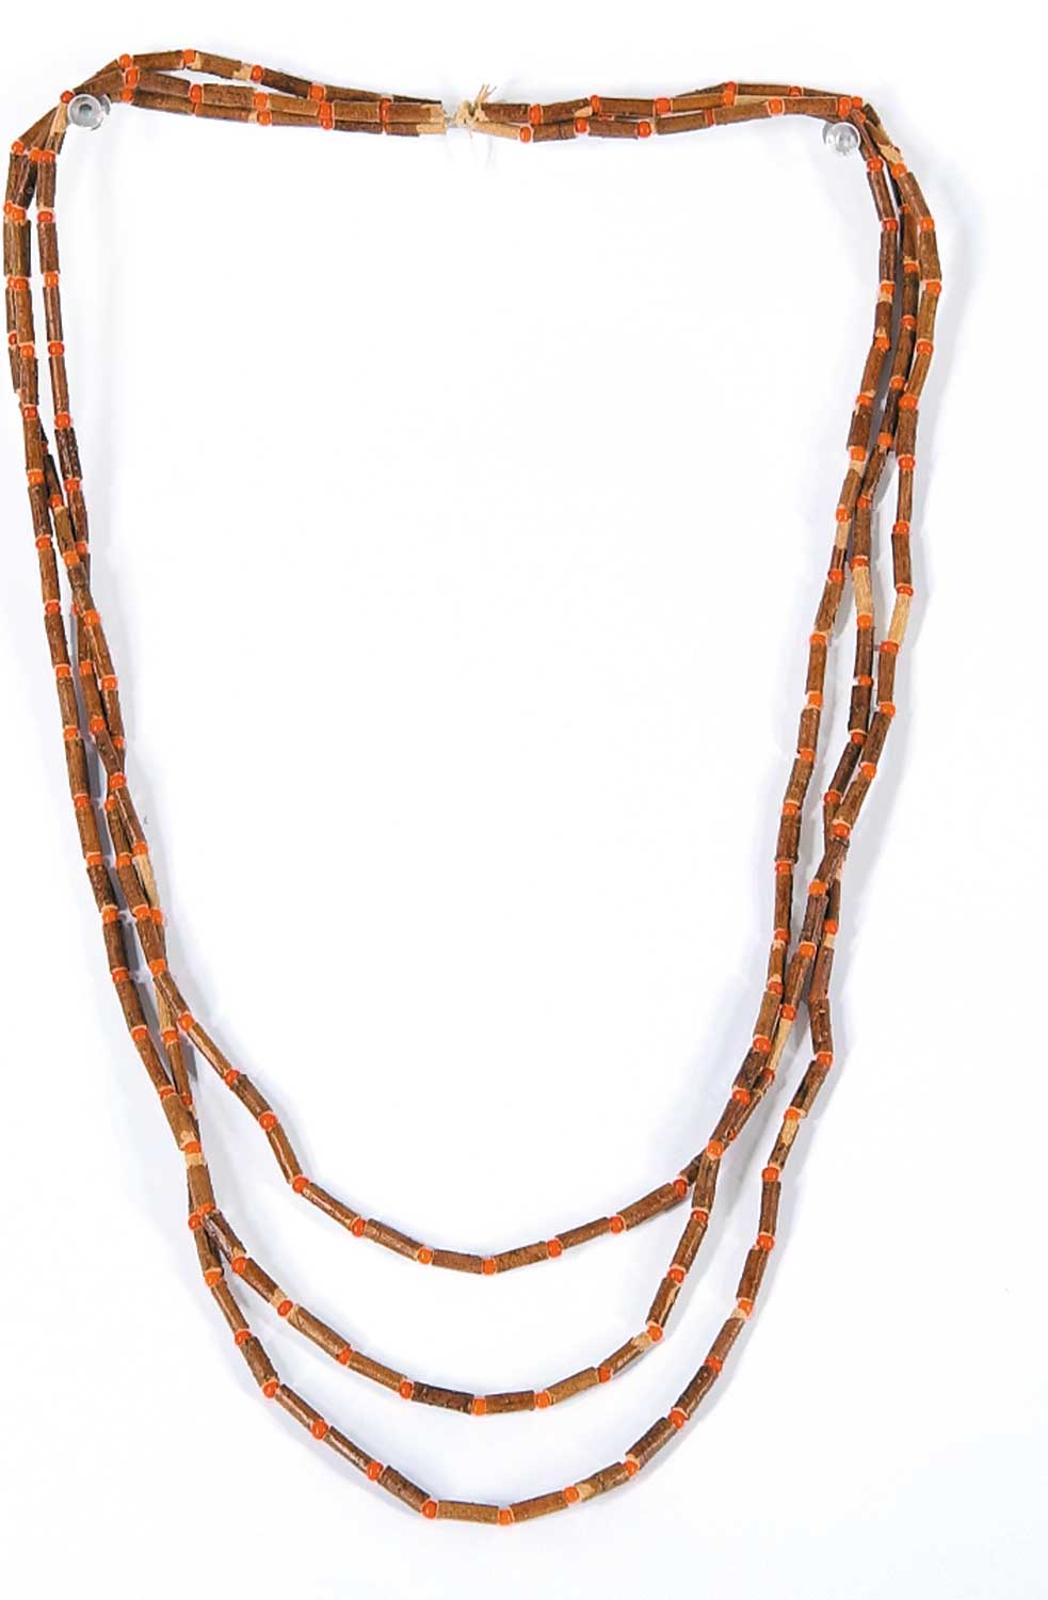 Robert Charles Aller (1922-2008) - Untitled - Red Willow Beaded Necklace